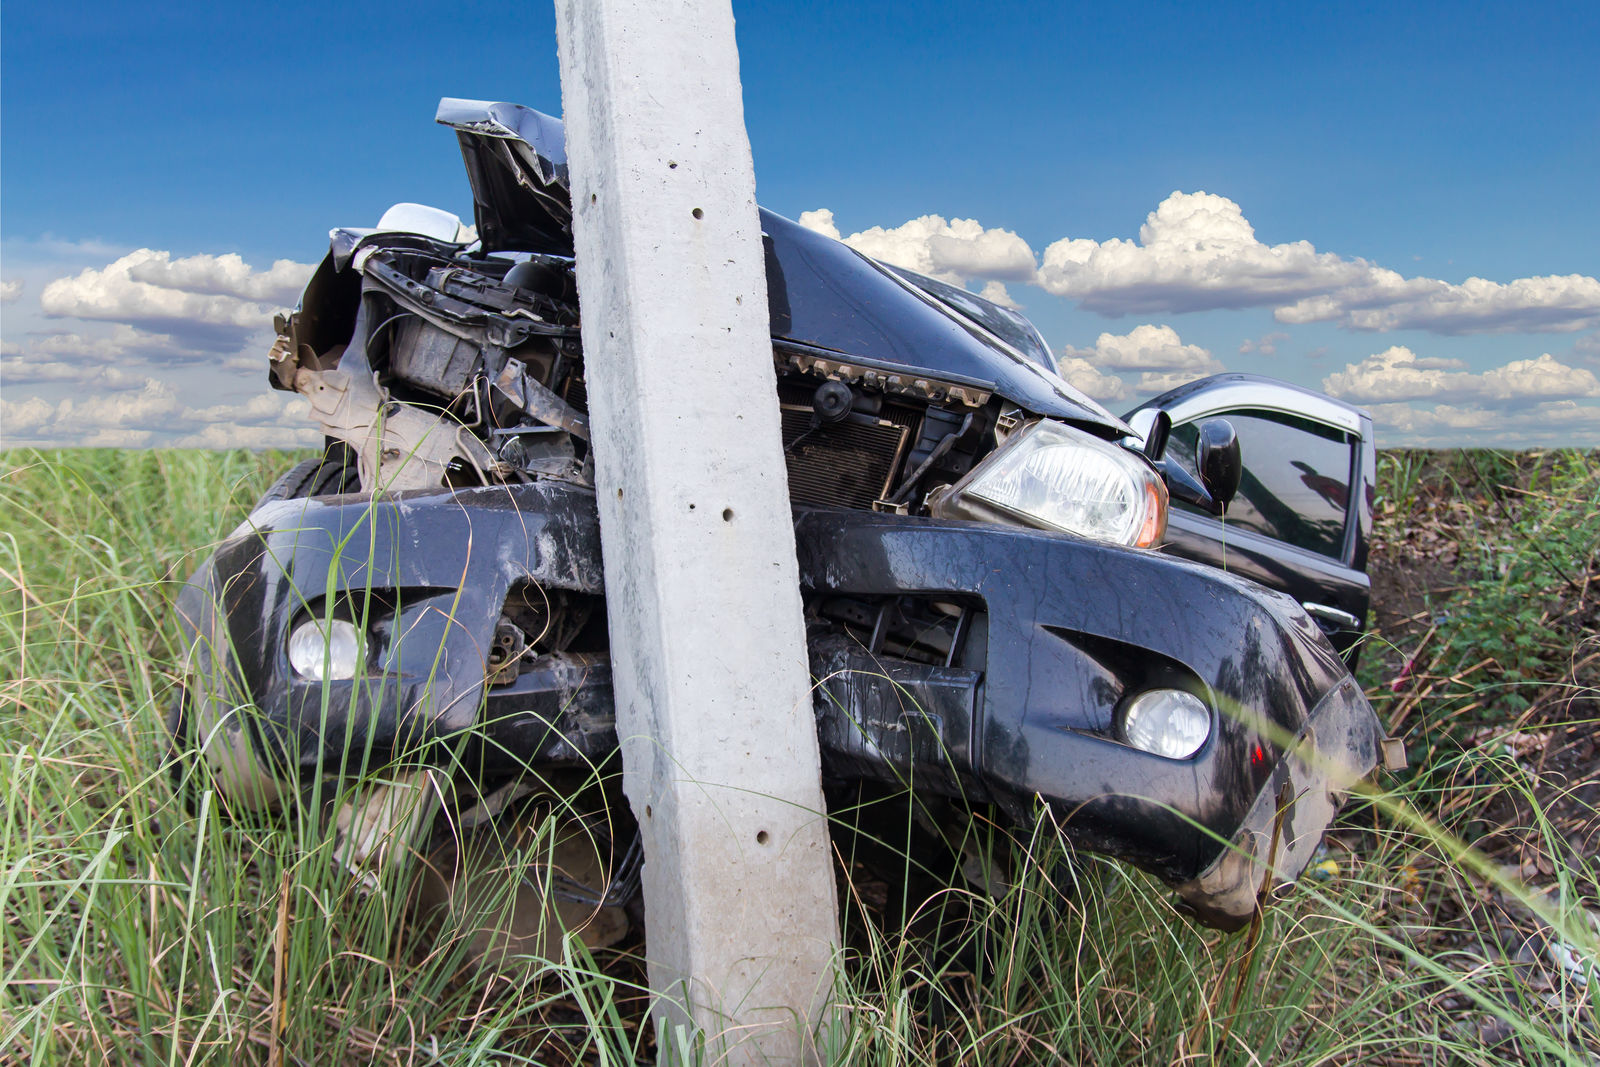 Does my car insurance cover accidents on private property?